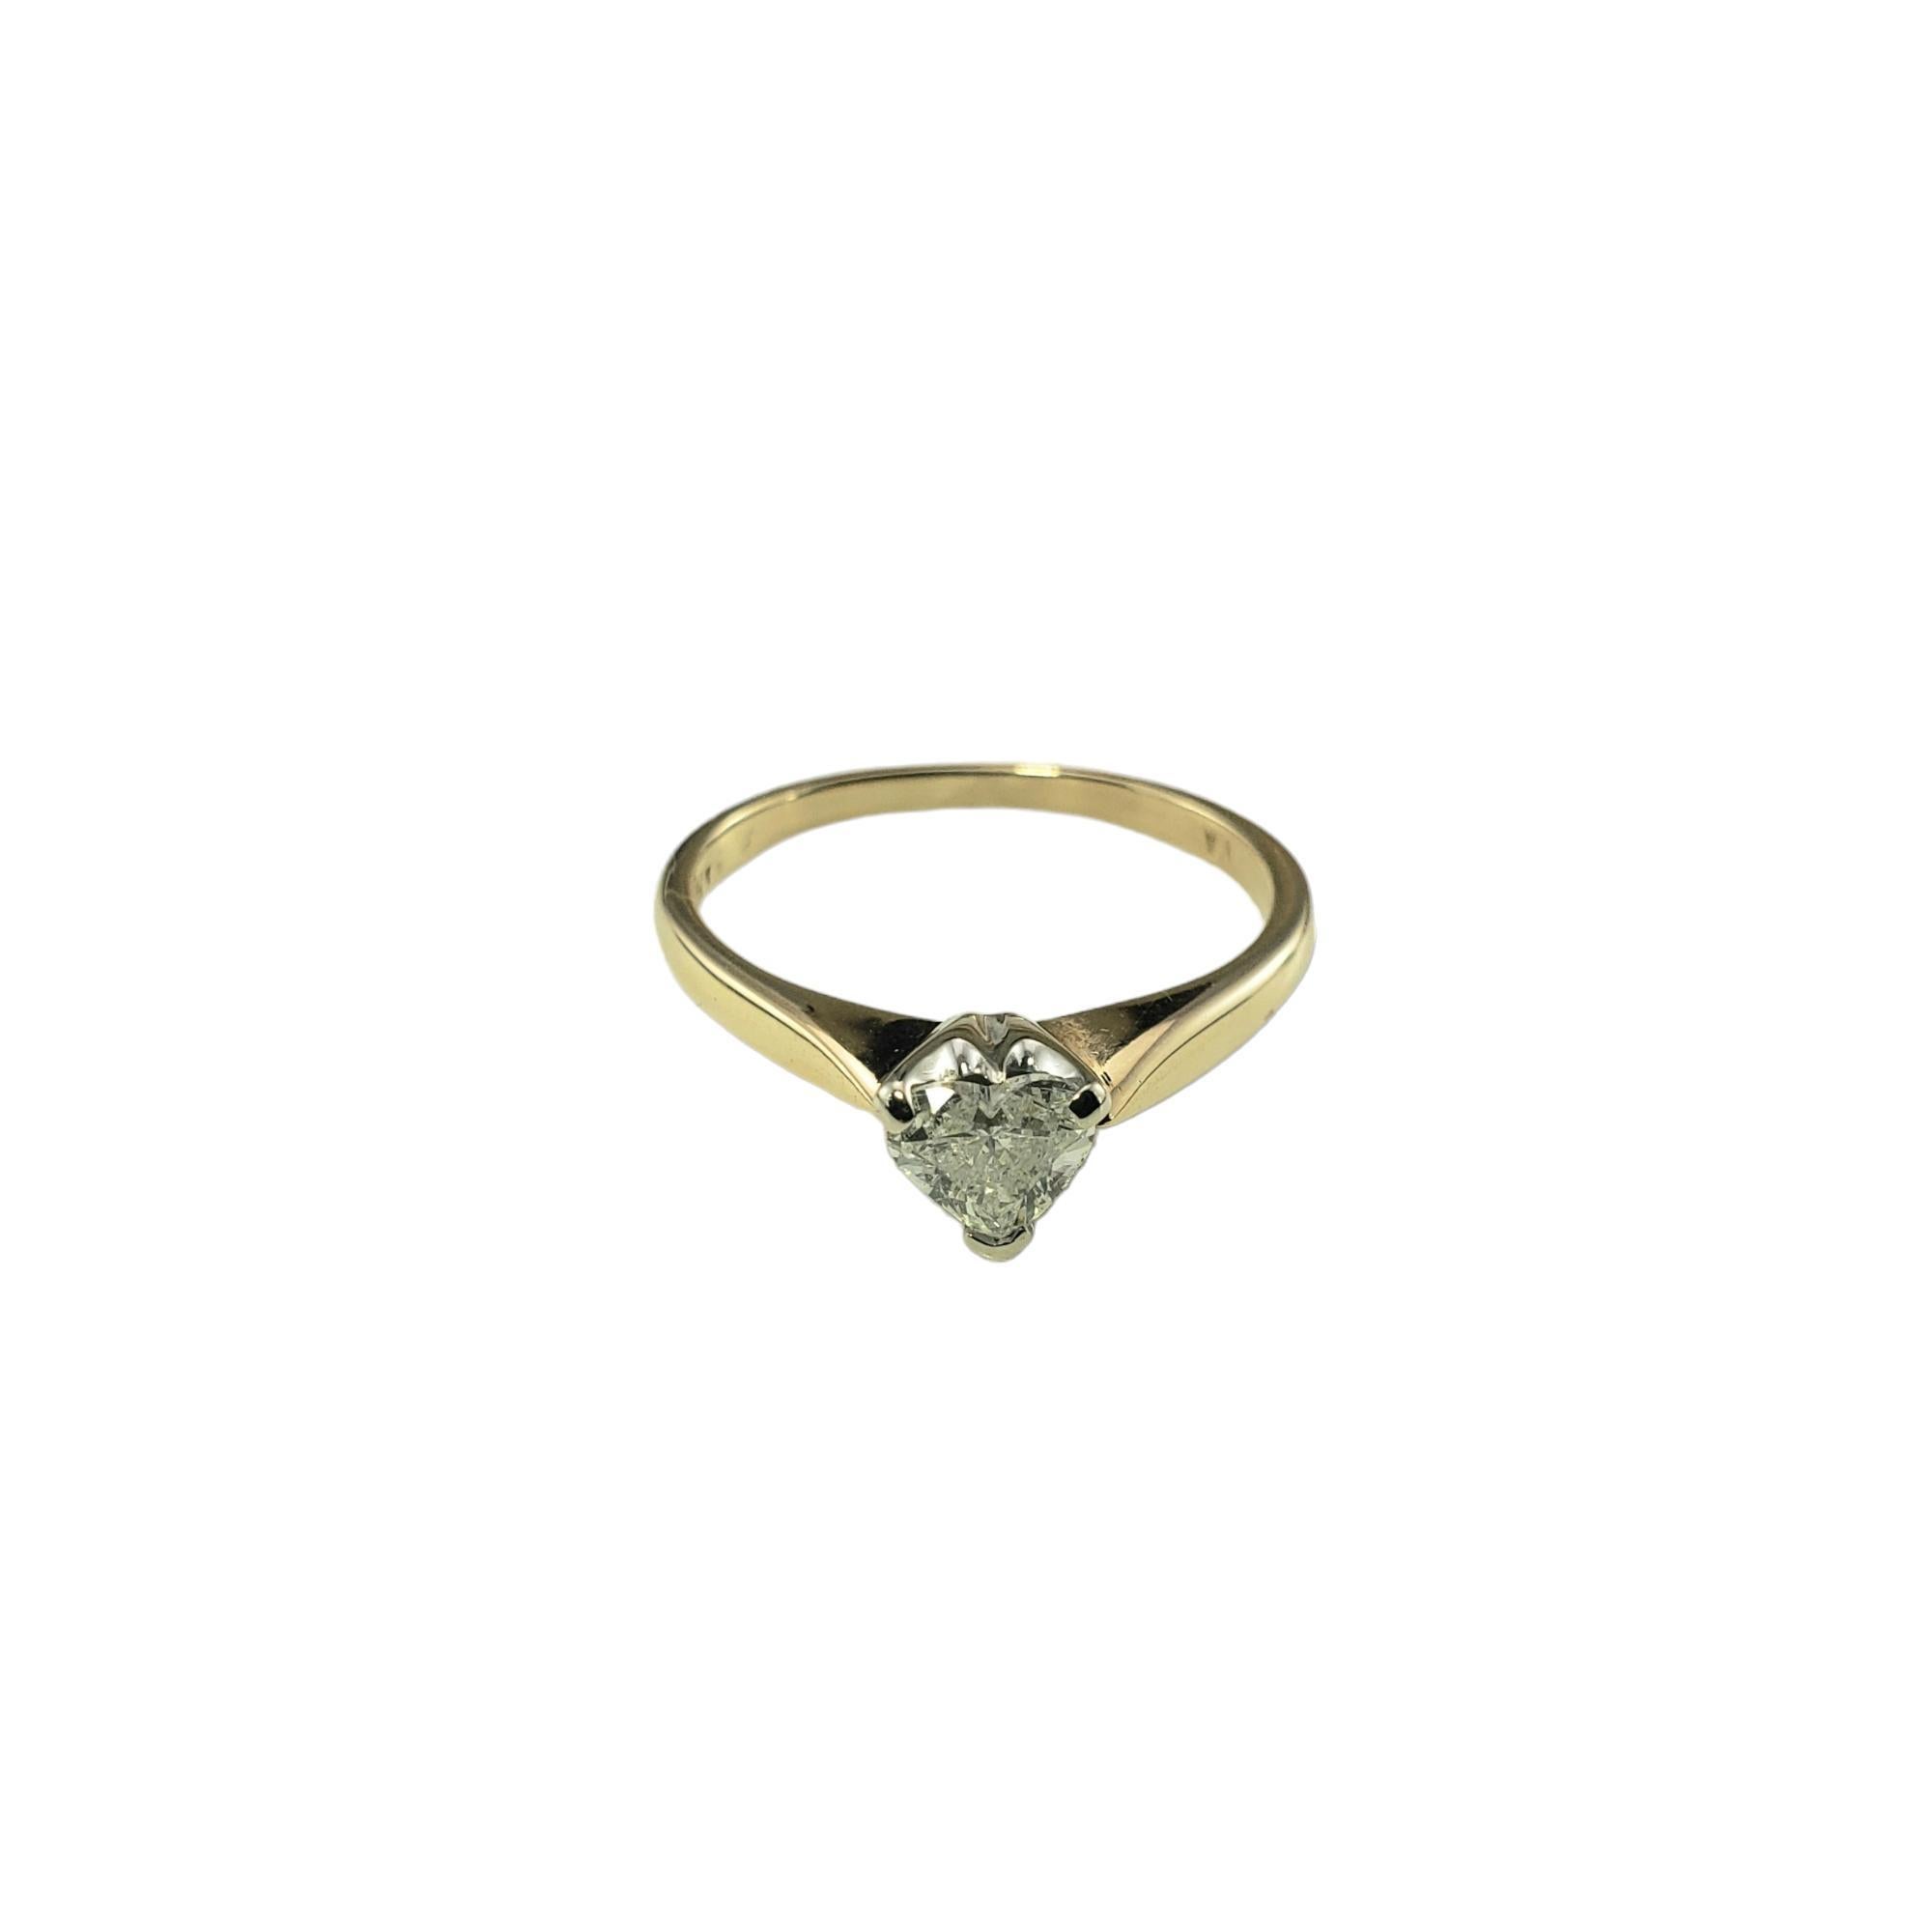 14 Karat Yellow Gold Heart Shaped Diamond Engagement Ring #15689-

This sparkling engagement ring features one heart shaped diamond (6 mm x 6 mm) set in classic 14K yellow gold. Shank: 1.5 mm.

Approximate total diamond weight:   .45 ct.

Diamond